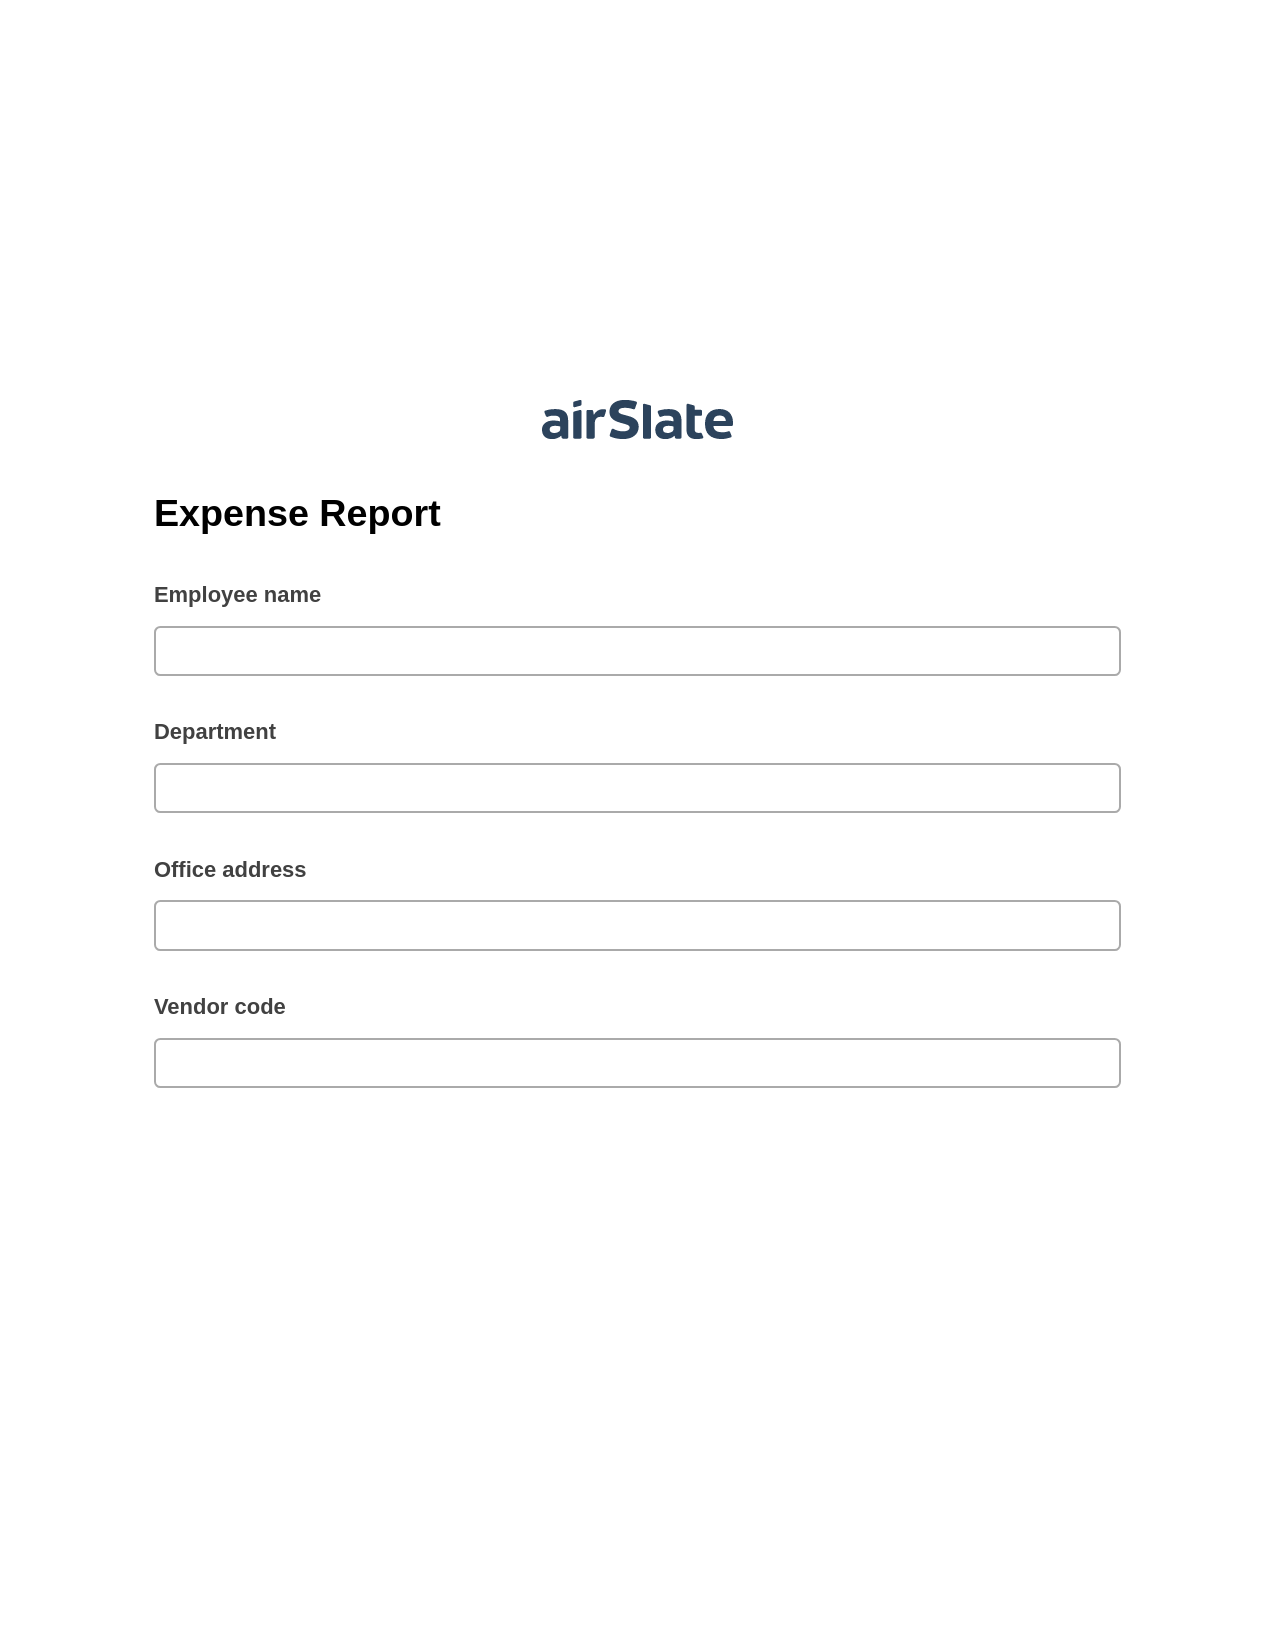 Expense Report Pre-fill from Excel Spreadsheet Bot, Update Salesforce Record Bot, Post-finish Document Bot